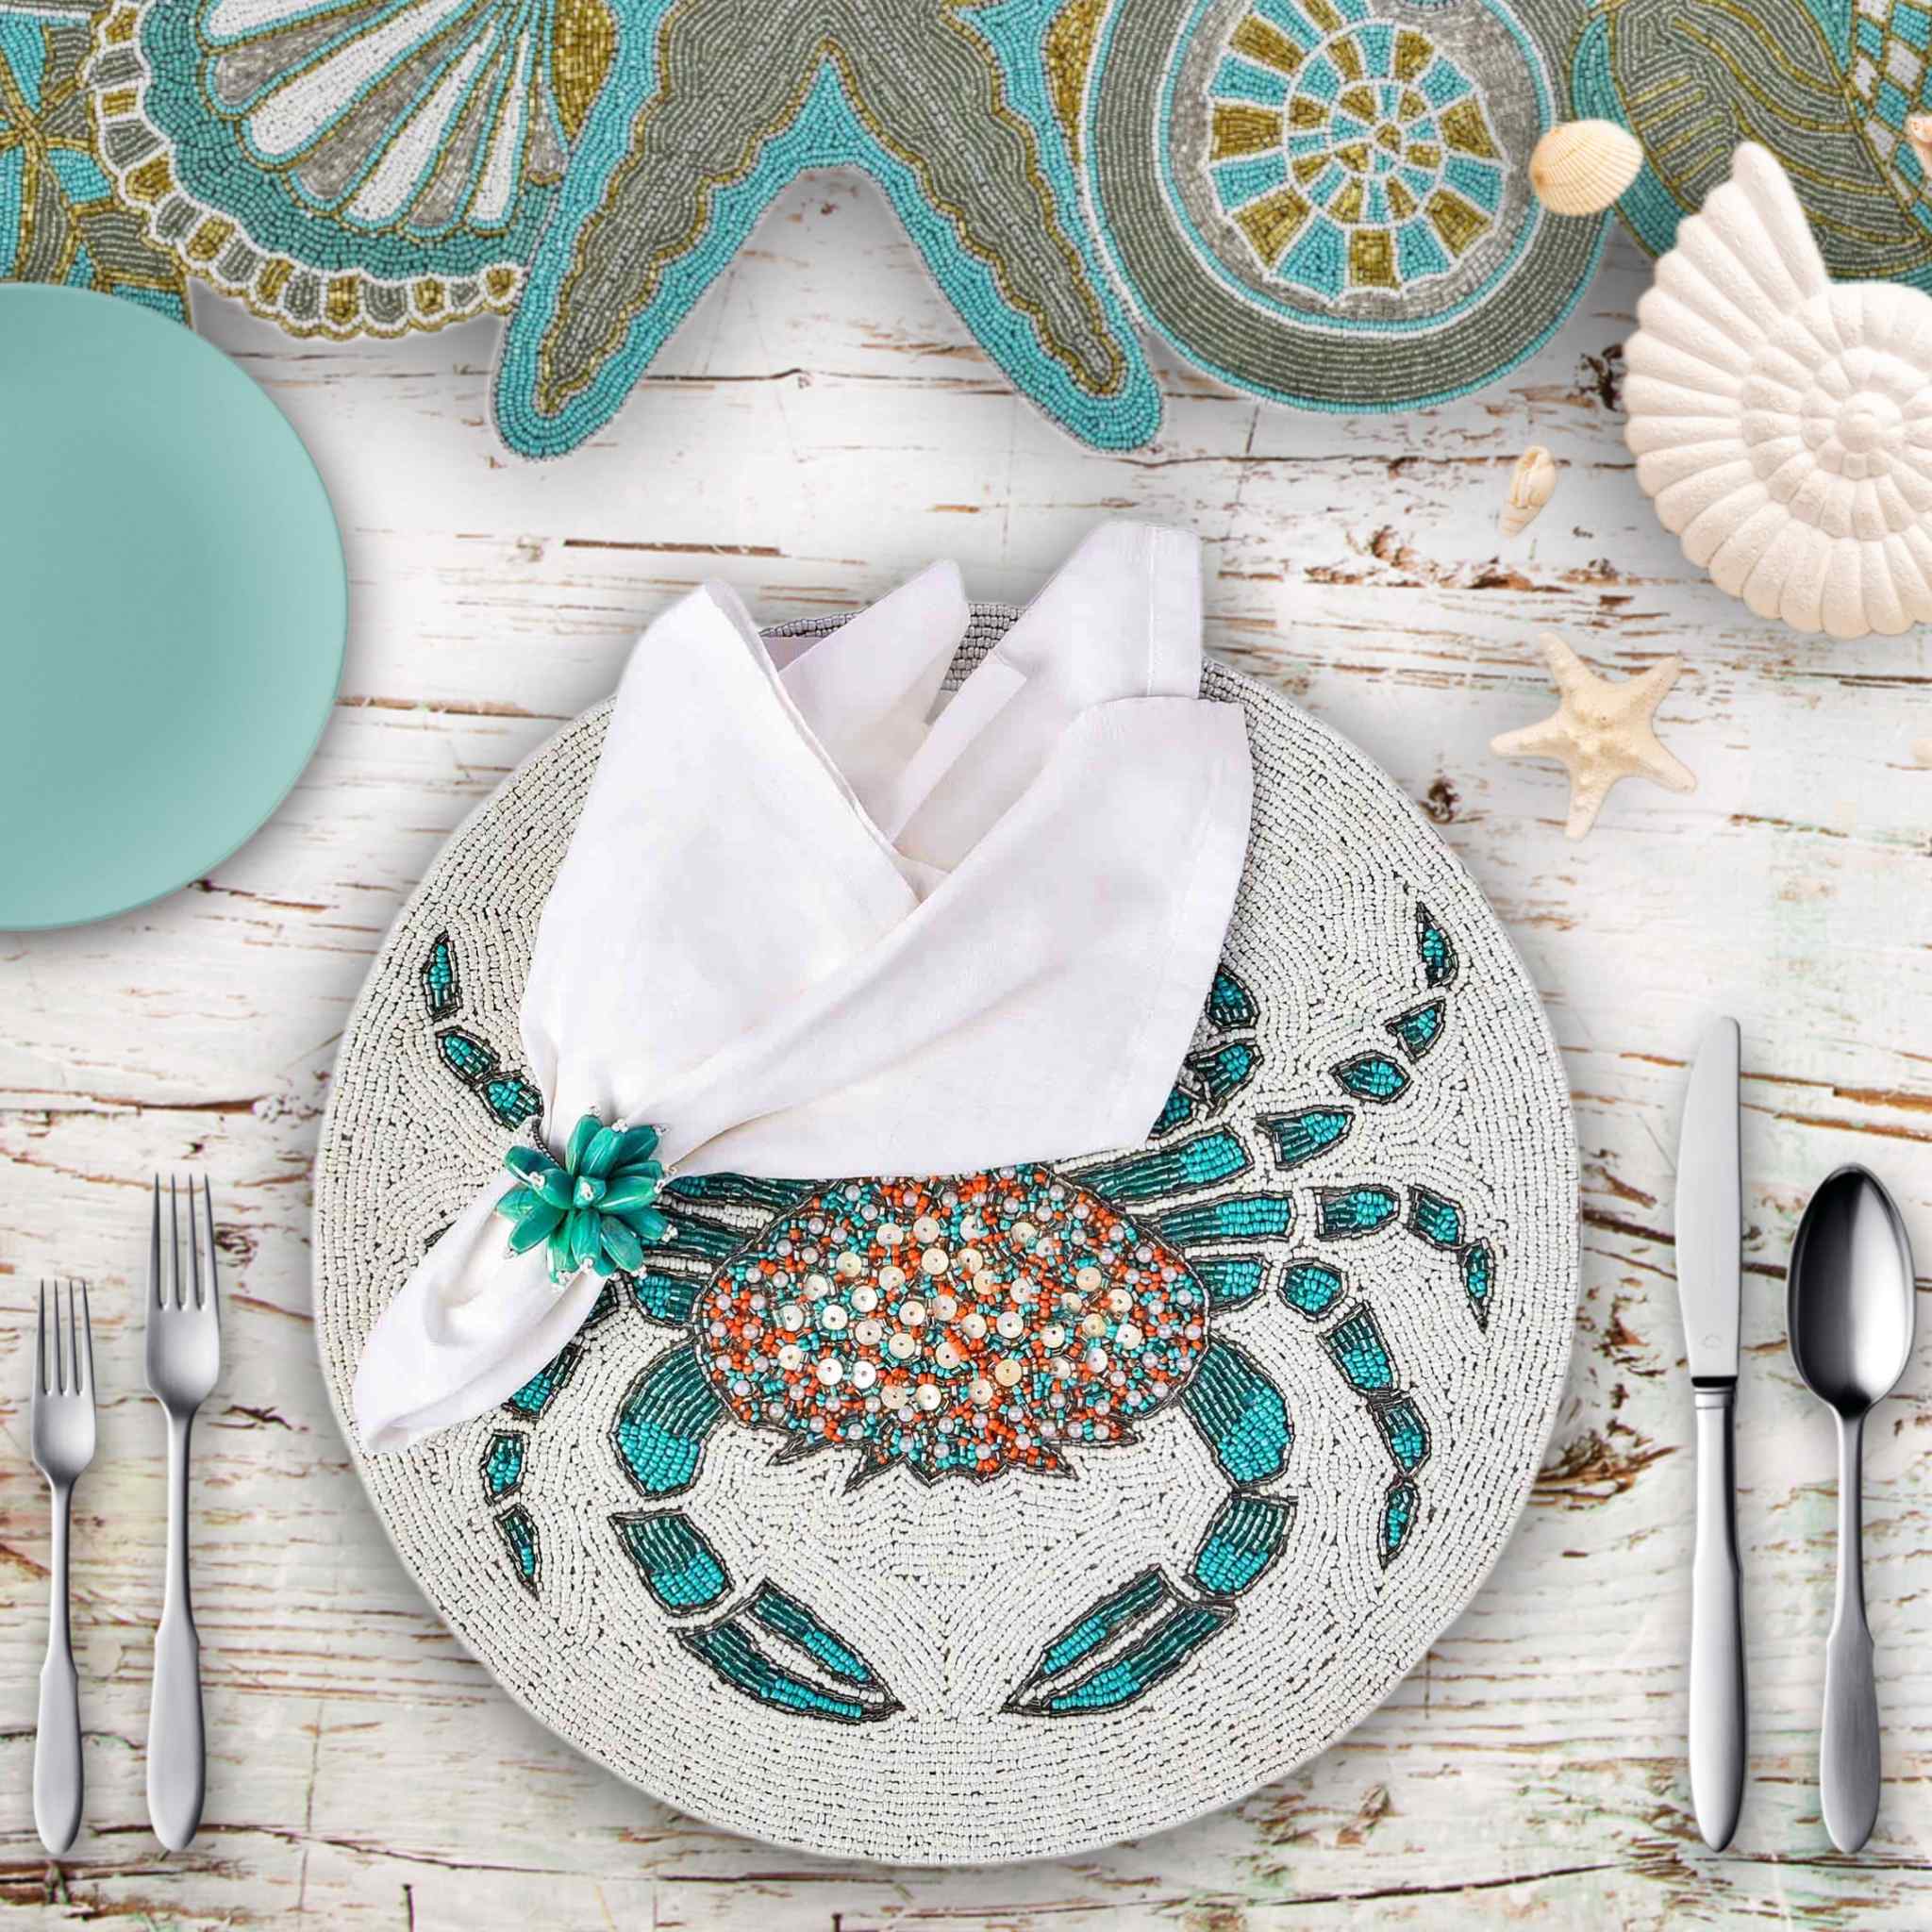 Stay Salty Embroidered Placemat in Cream & Teal, Set of 2/4